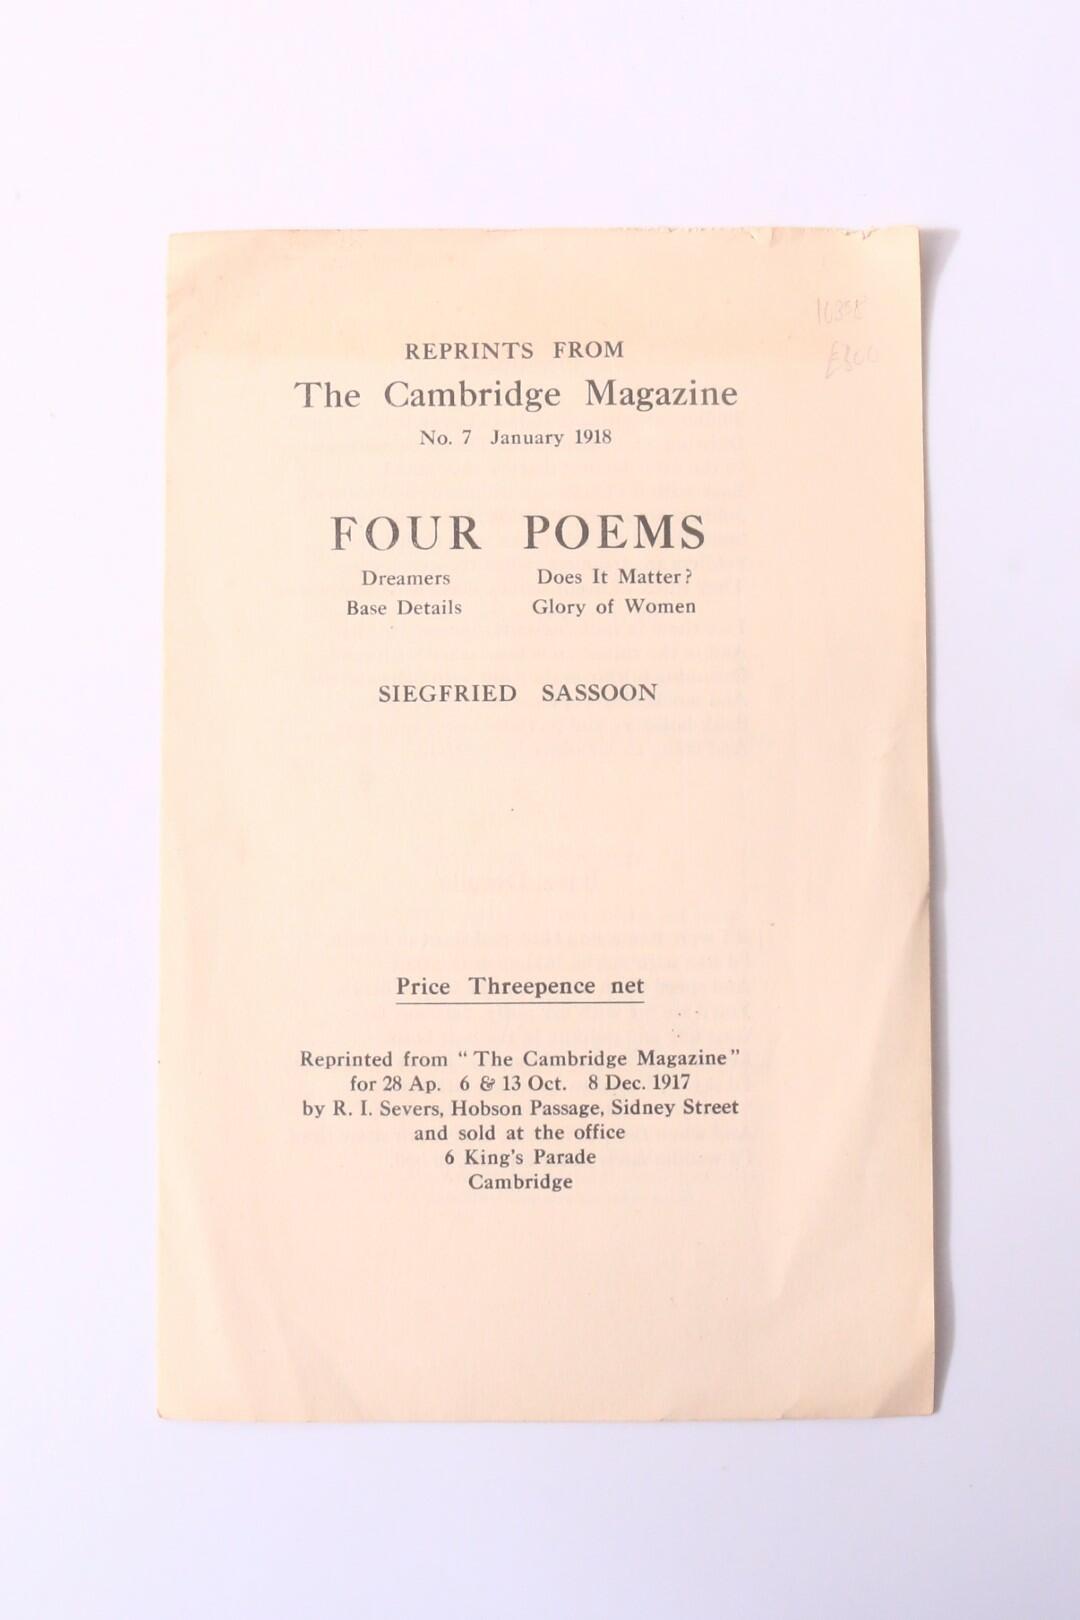 Siegfried Sassoon - Four Poems [Dreamers, Base Details, Does It Matter?, Glory of Women] - The Cambridge Magazine, 1918, First Edition.